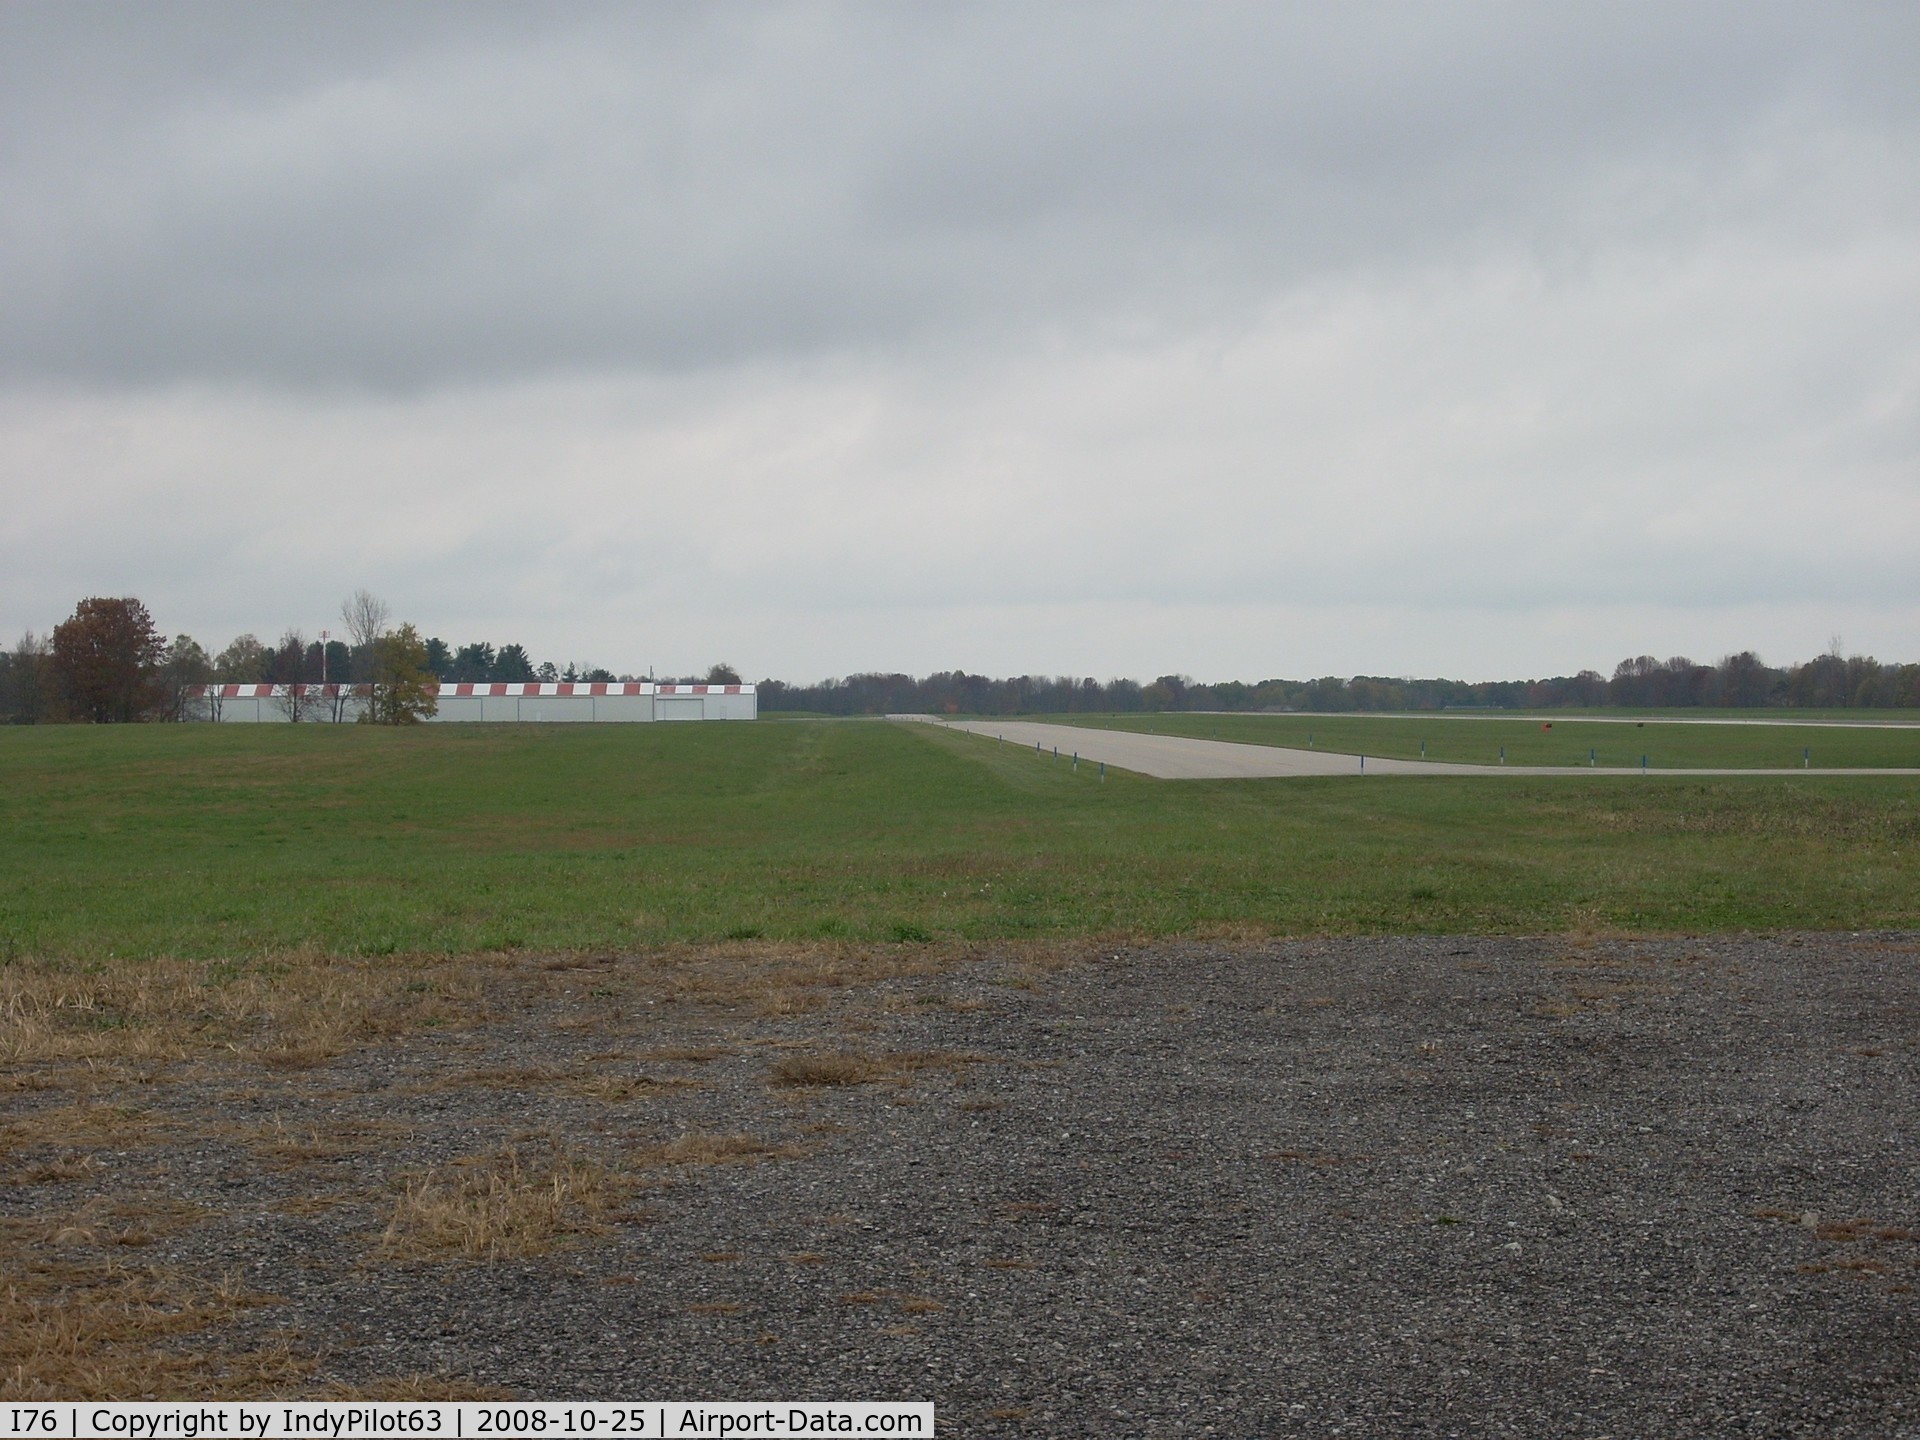 Peru Municipal Airport (I76) - Looking up runway 01 from the south